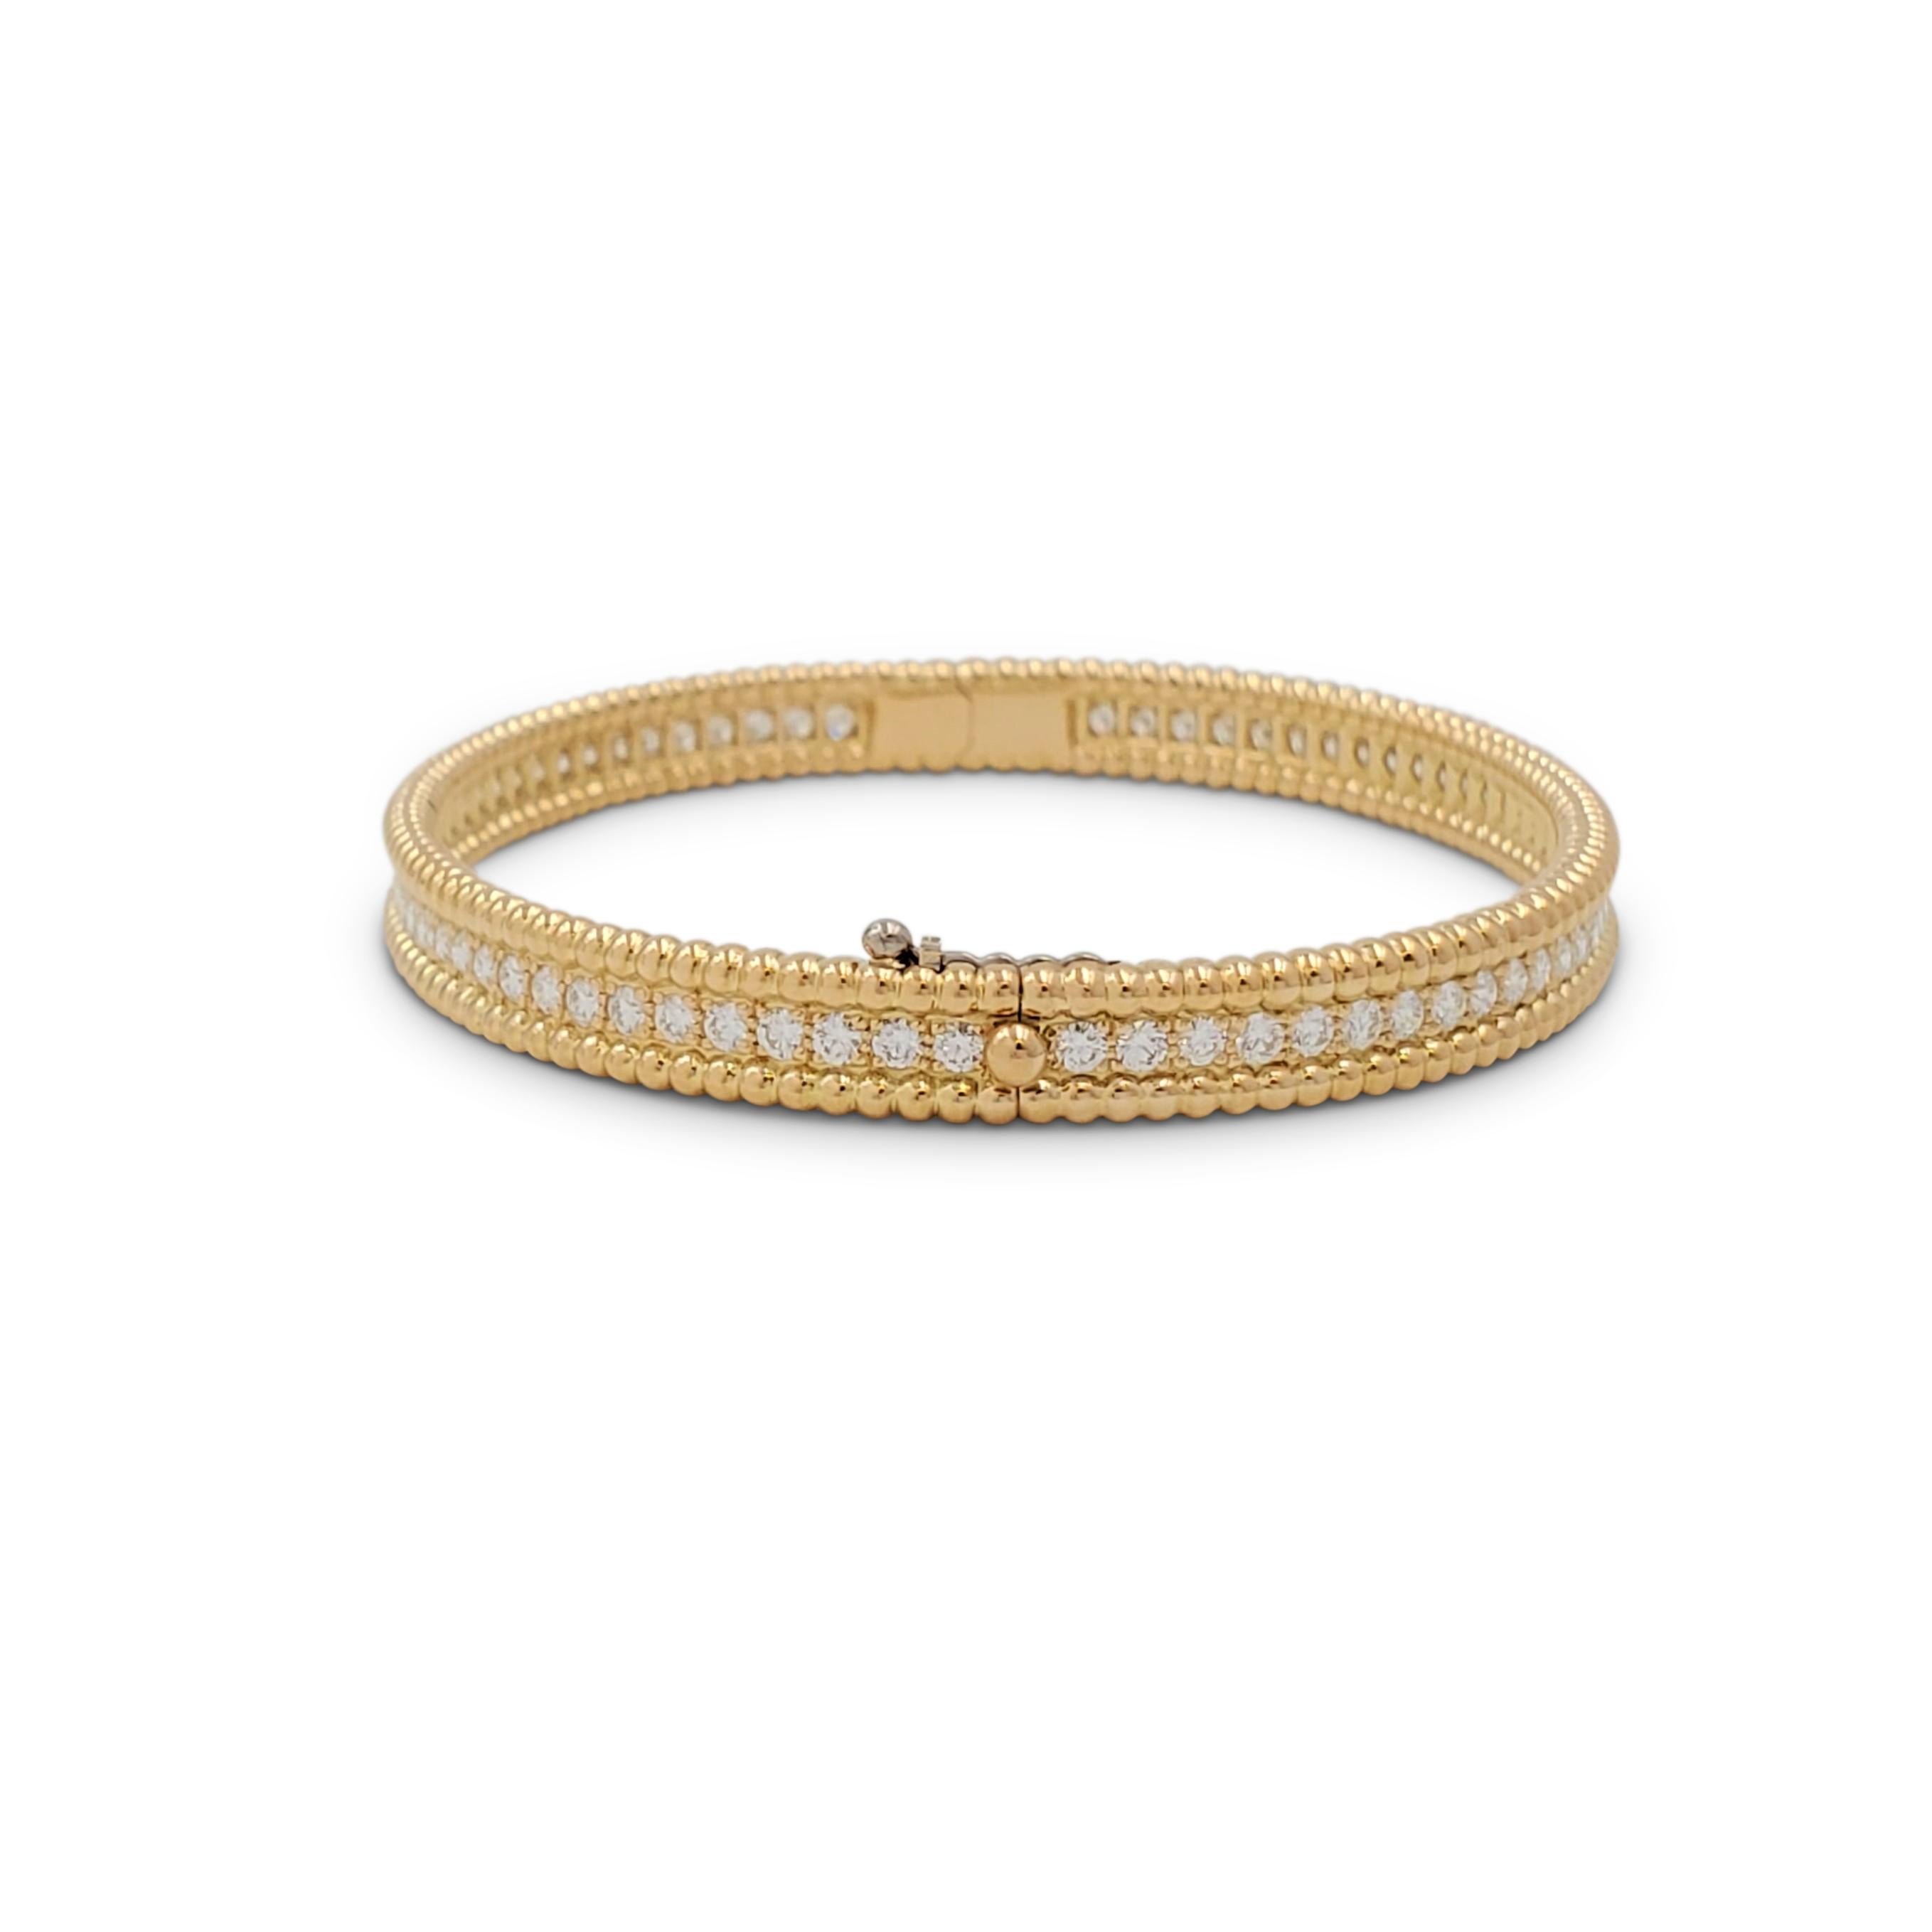 Authentic Van Cleef & Arpels 'Perlée' bracelet crafted in 18 karat yellow gold features a single row of high-quality round brilliant cut diamonds weighing an estimated 2.16 carats total weight (E-F, VS).  Signed VCA, Au750, M, with serial number.